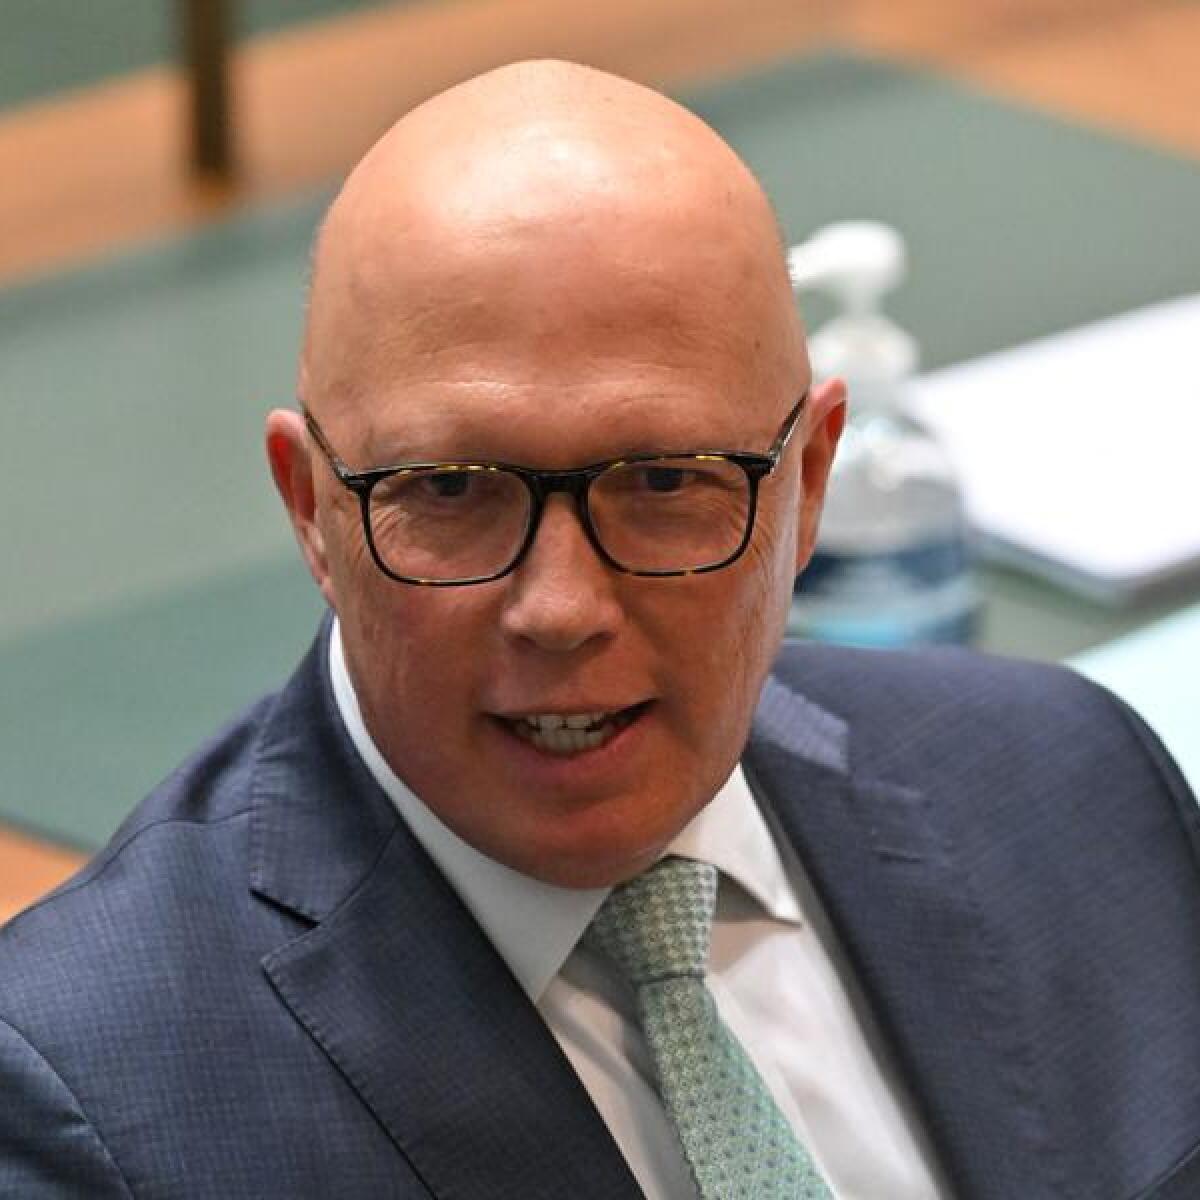 Leader of the Opposition Peter Dutton during Question Time